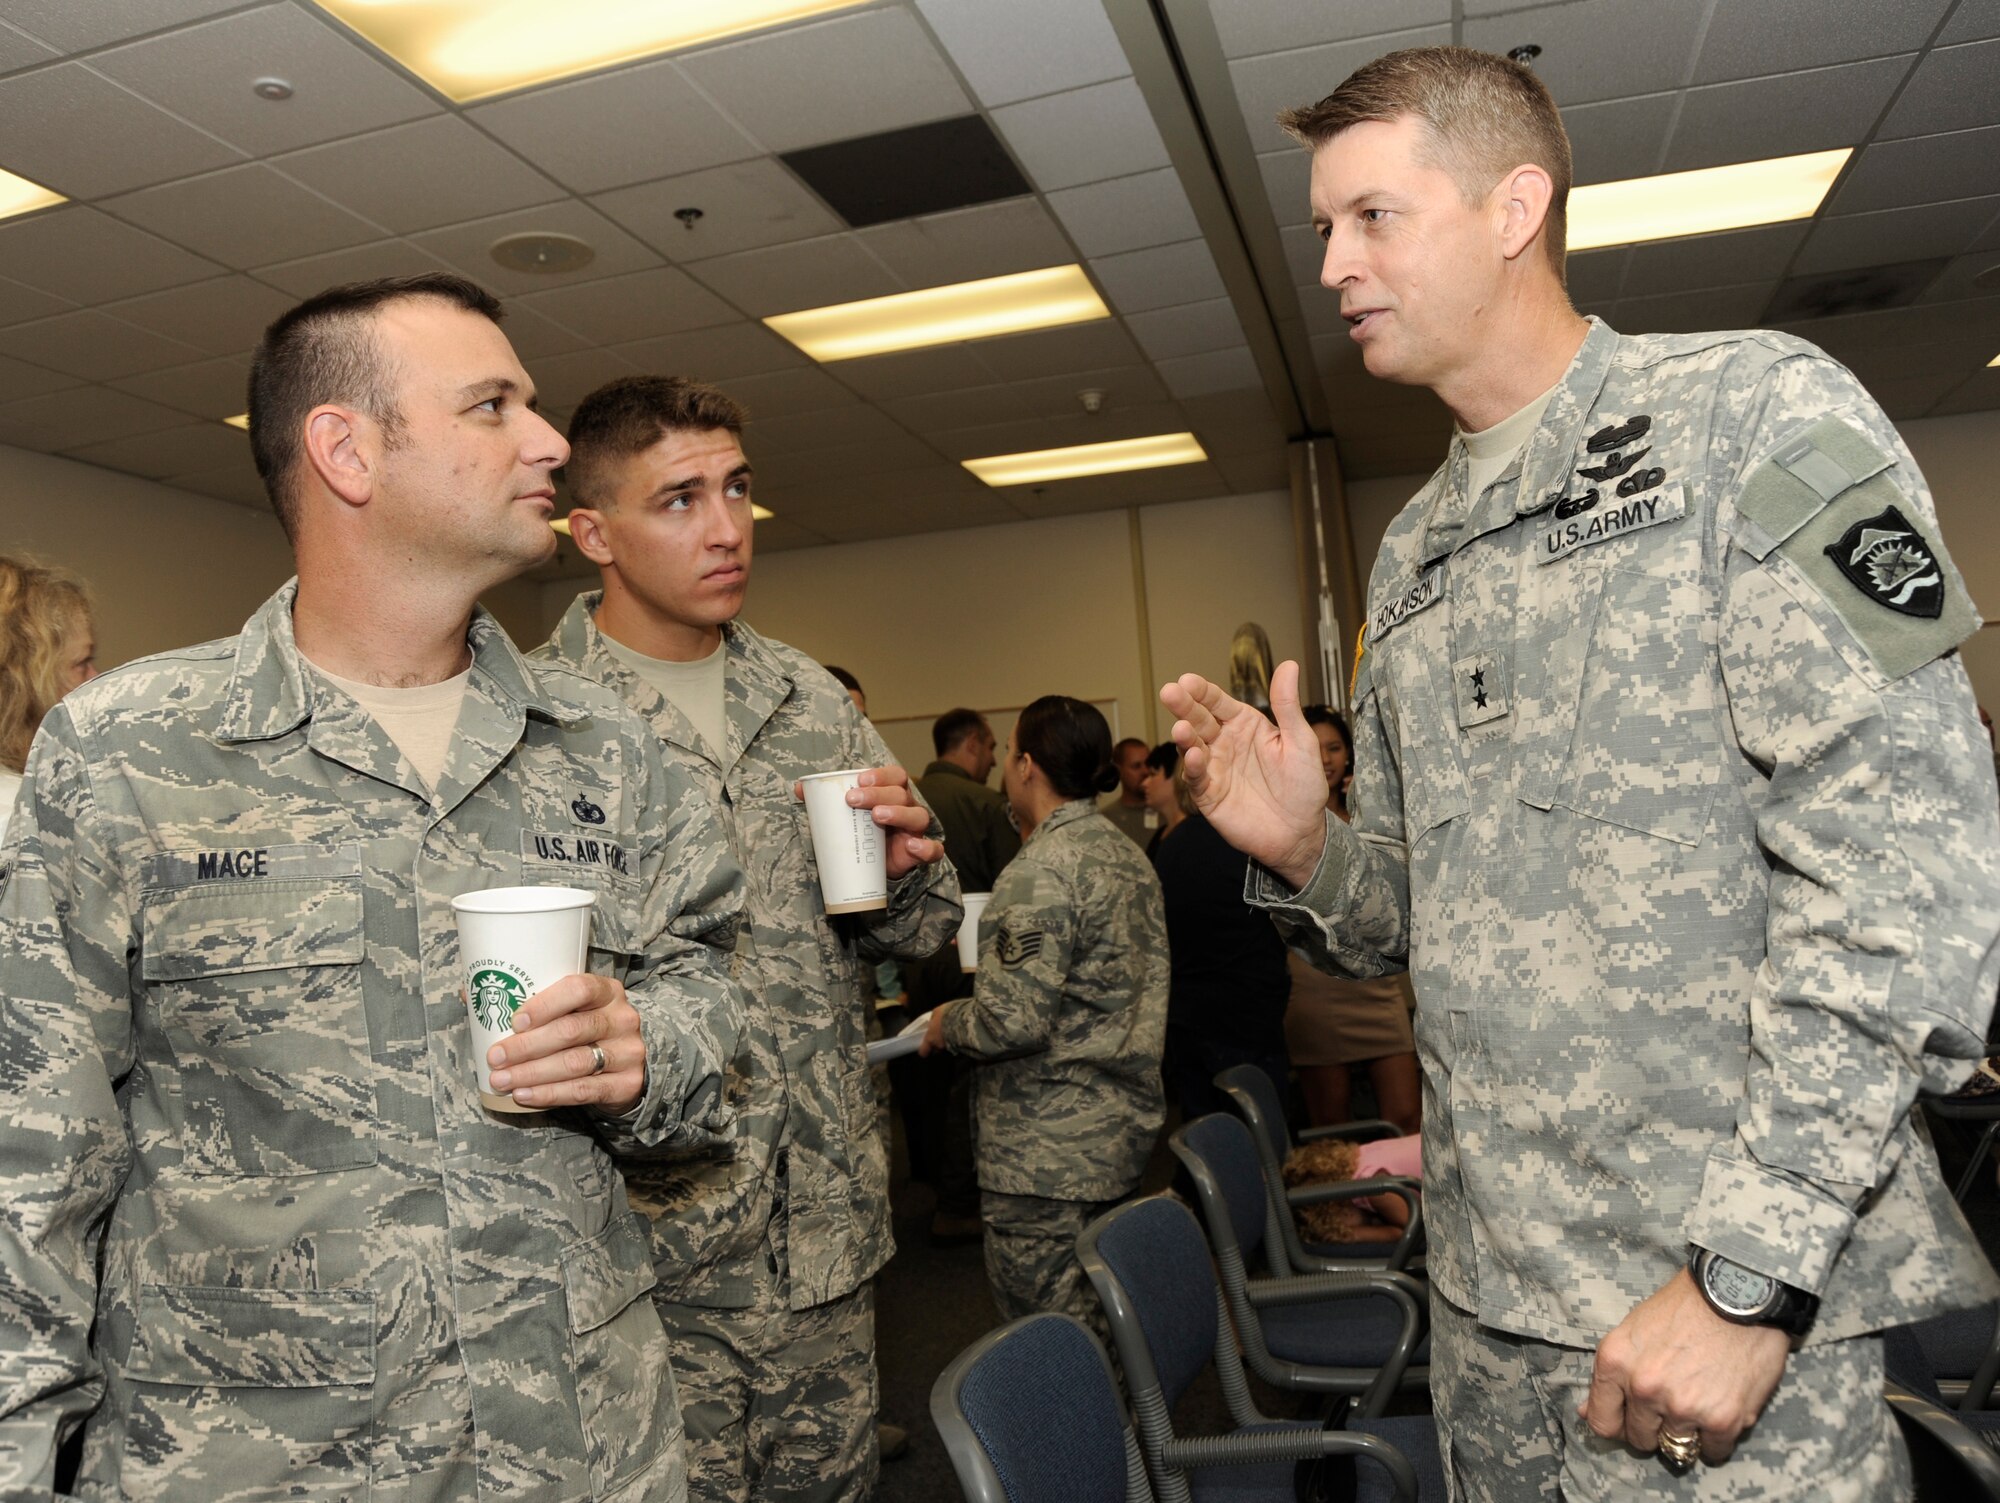 Maj. Gen. Daniel Hokanson, Oregon Adjutant General (right) discusses aspects of the recent deployment by Tech. Sgt.  Daniel Mace and Senior Airman Benjamin Courtney (left) during a USO event held at the Portland Air National Guard Base, Ore., Aug. 9, 2013. A total of 26 Airmen from the 142nd Fighter Wing spent six months in Qatar in support of Operation Enduring Freedom. (Air National Guard photo by Tech. Sgt. John Hughel, 142nd Fighter Wing Public Affairs/released)